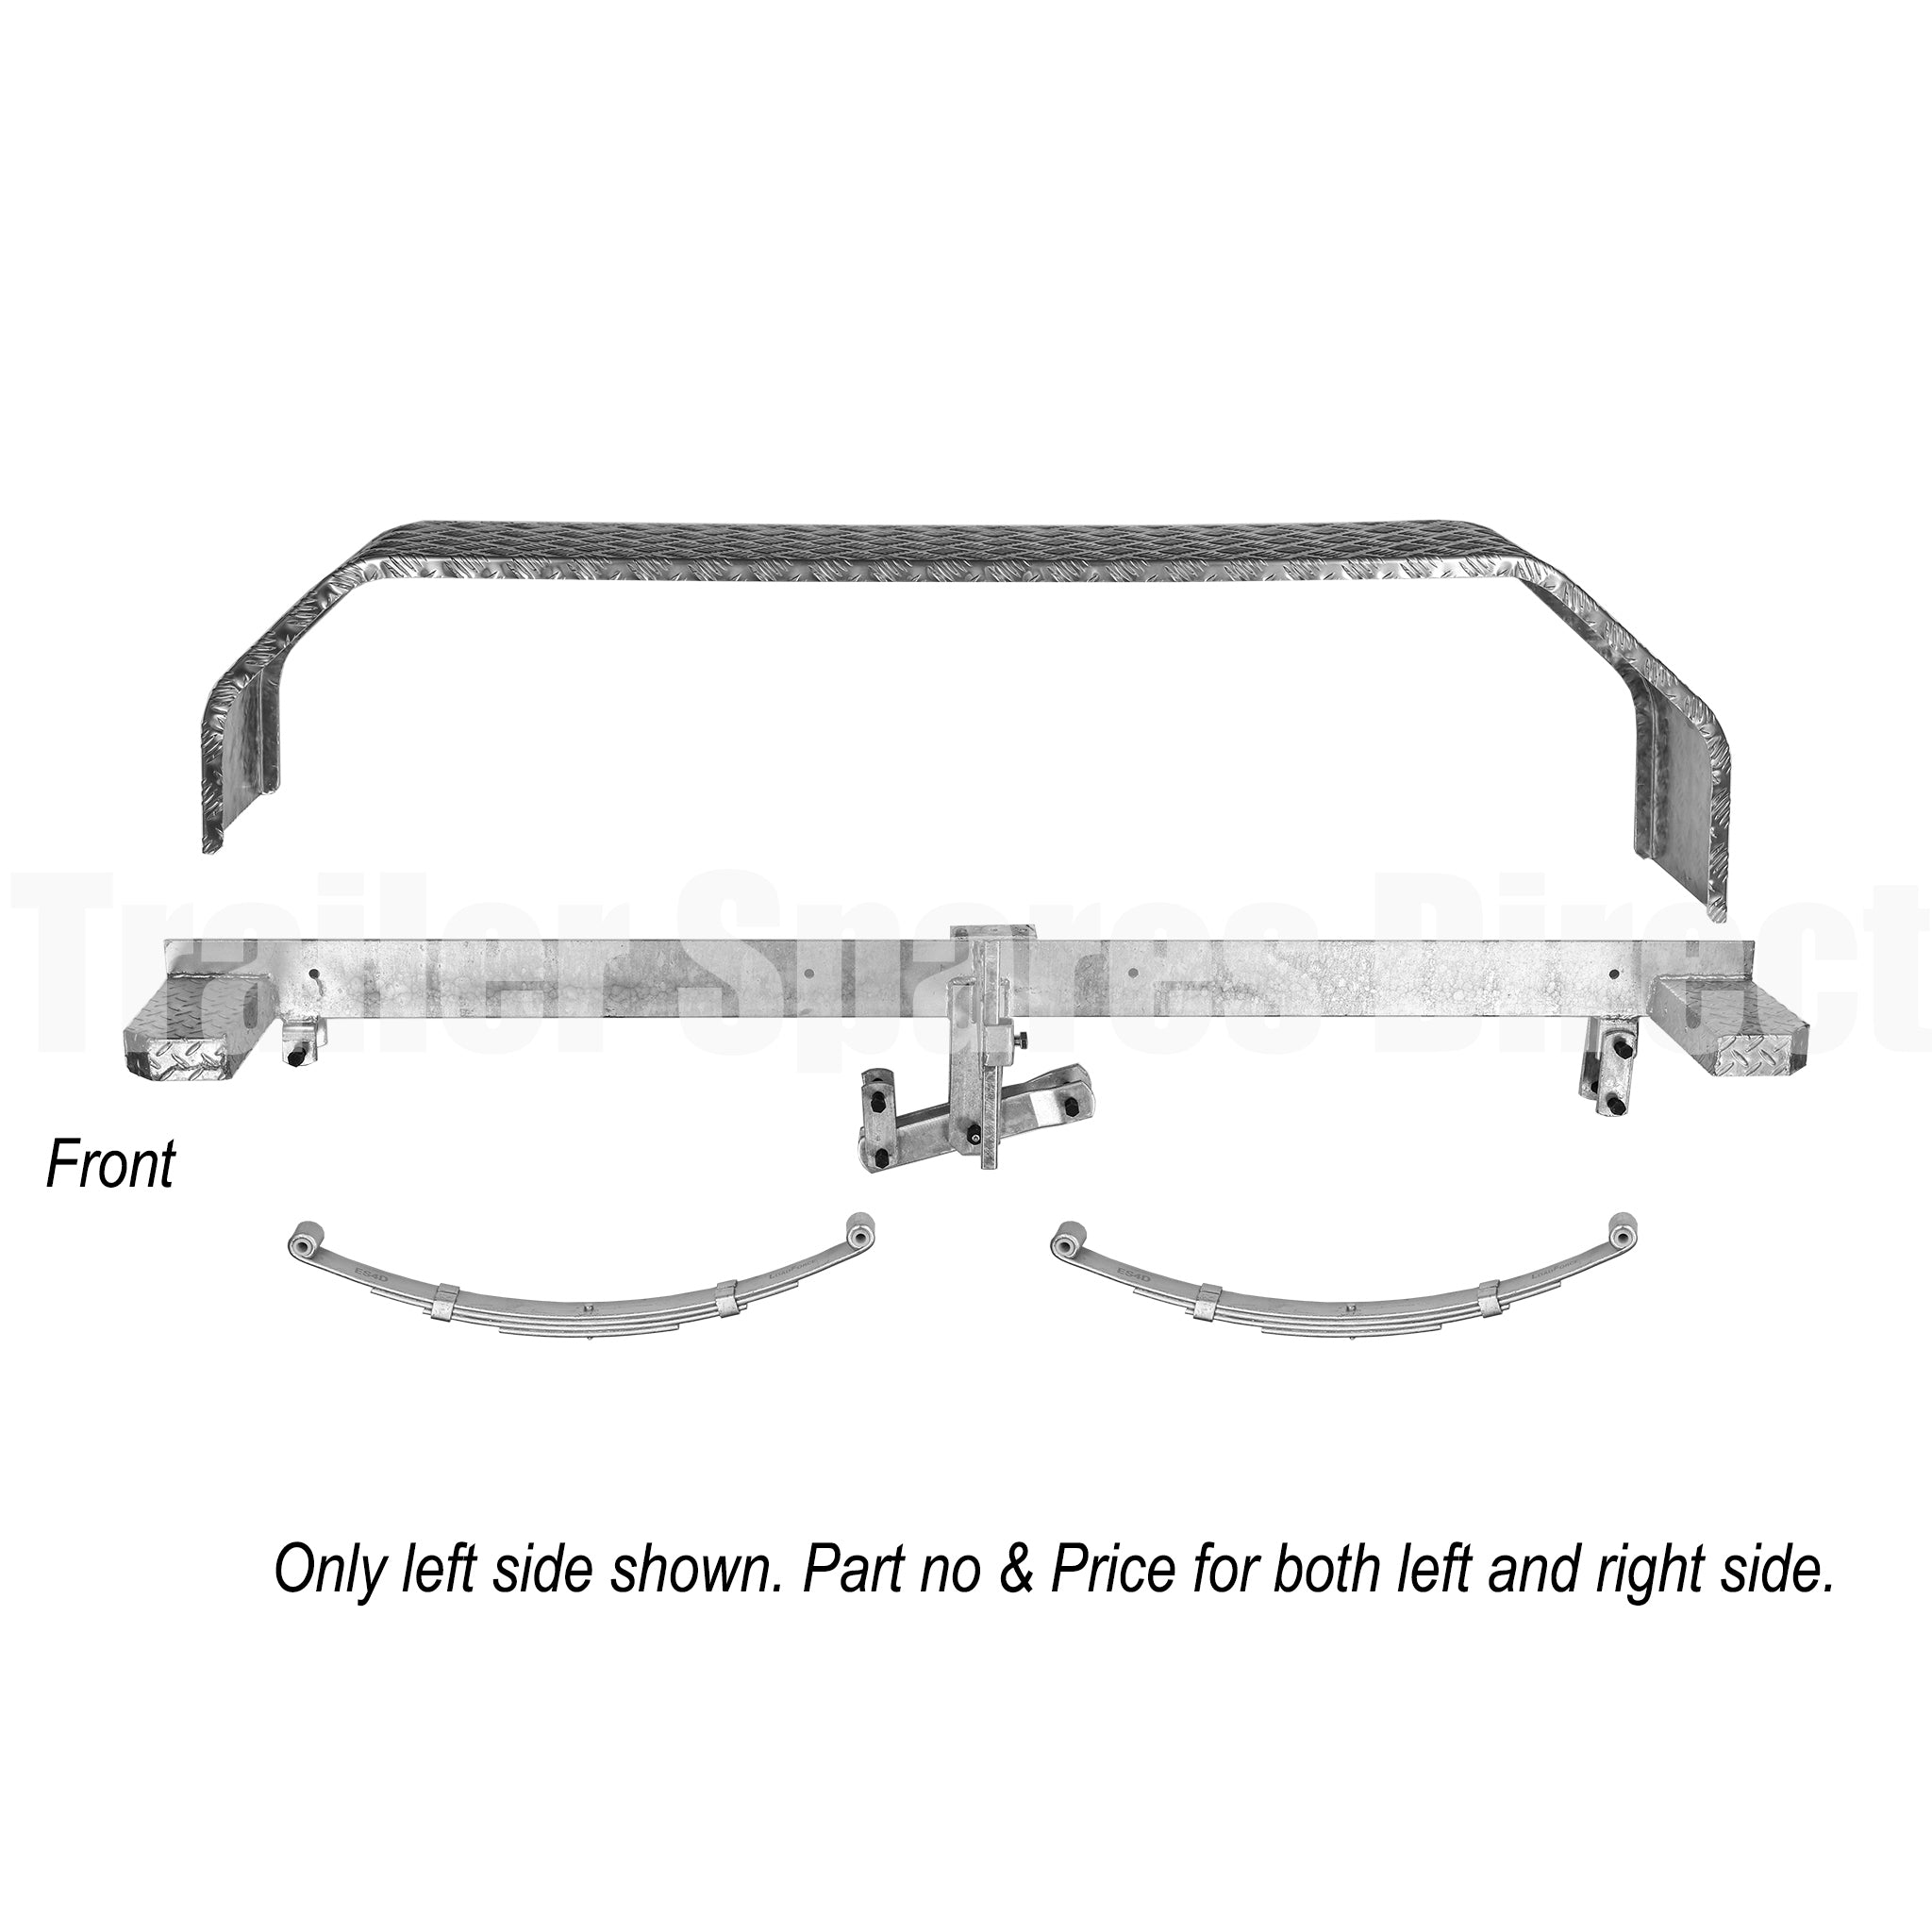 Galvanised suspension beam assembly for a 2200kg rated tandem trailer with 14 inch wheels (pair)